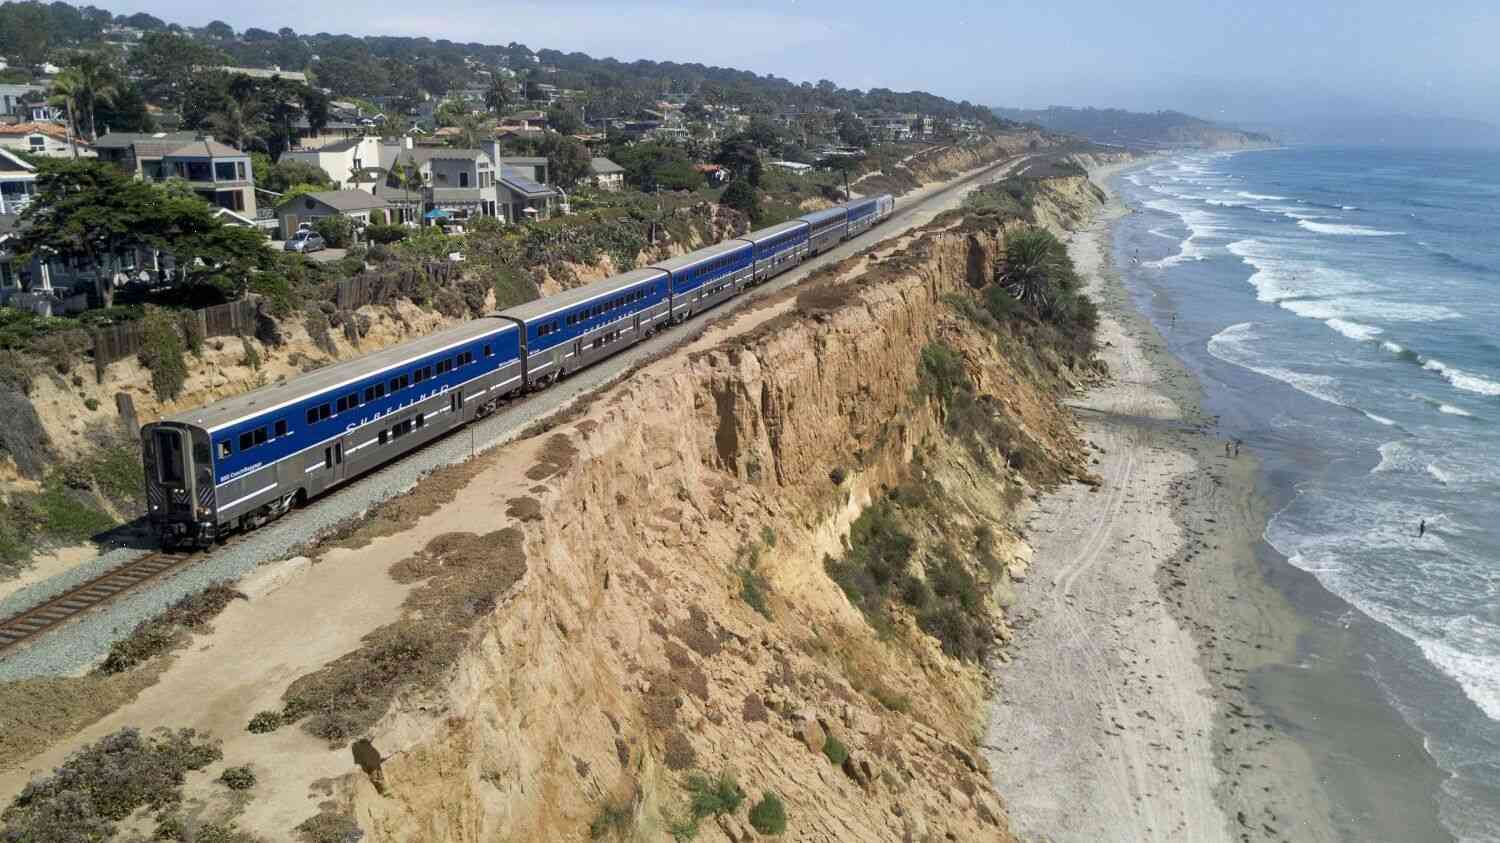 The Pacific Surfliner is an outdated rail line